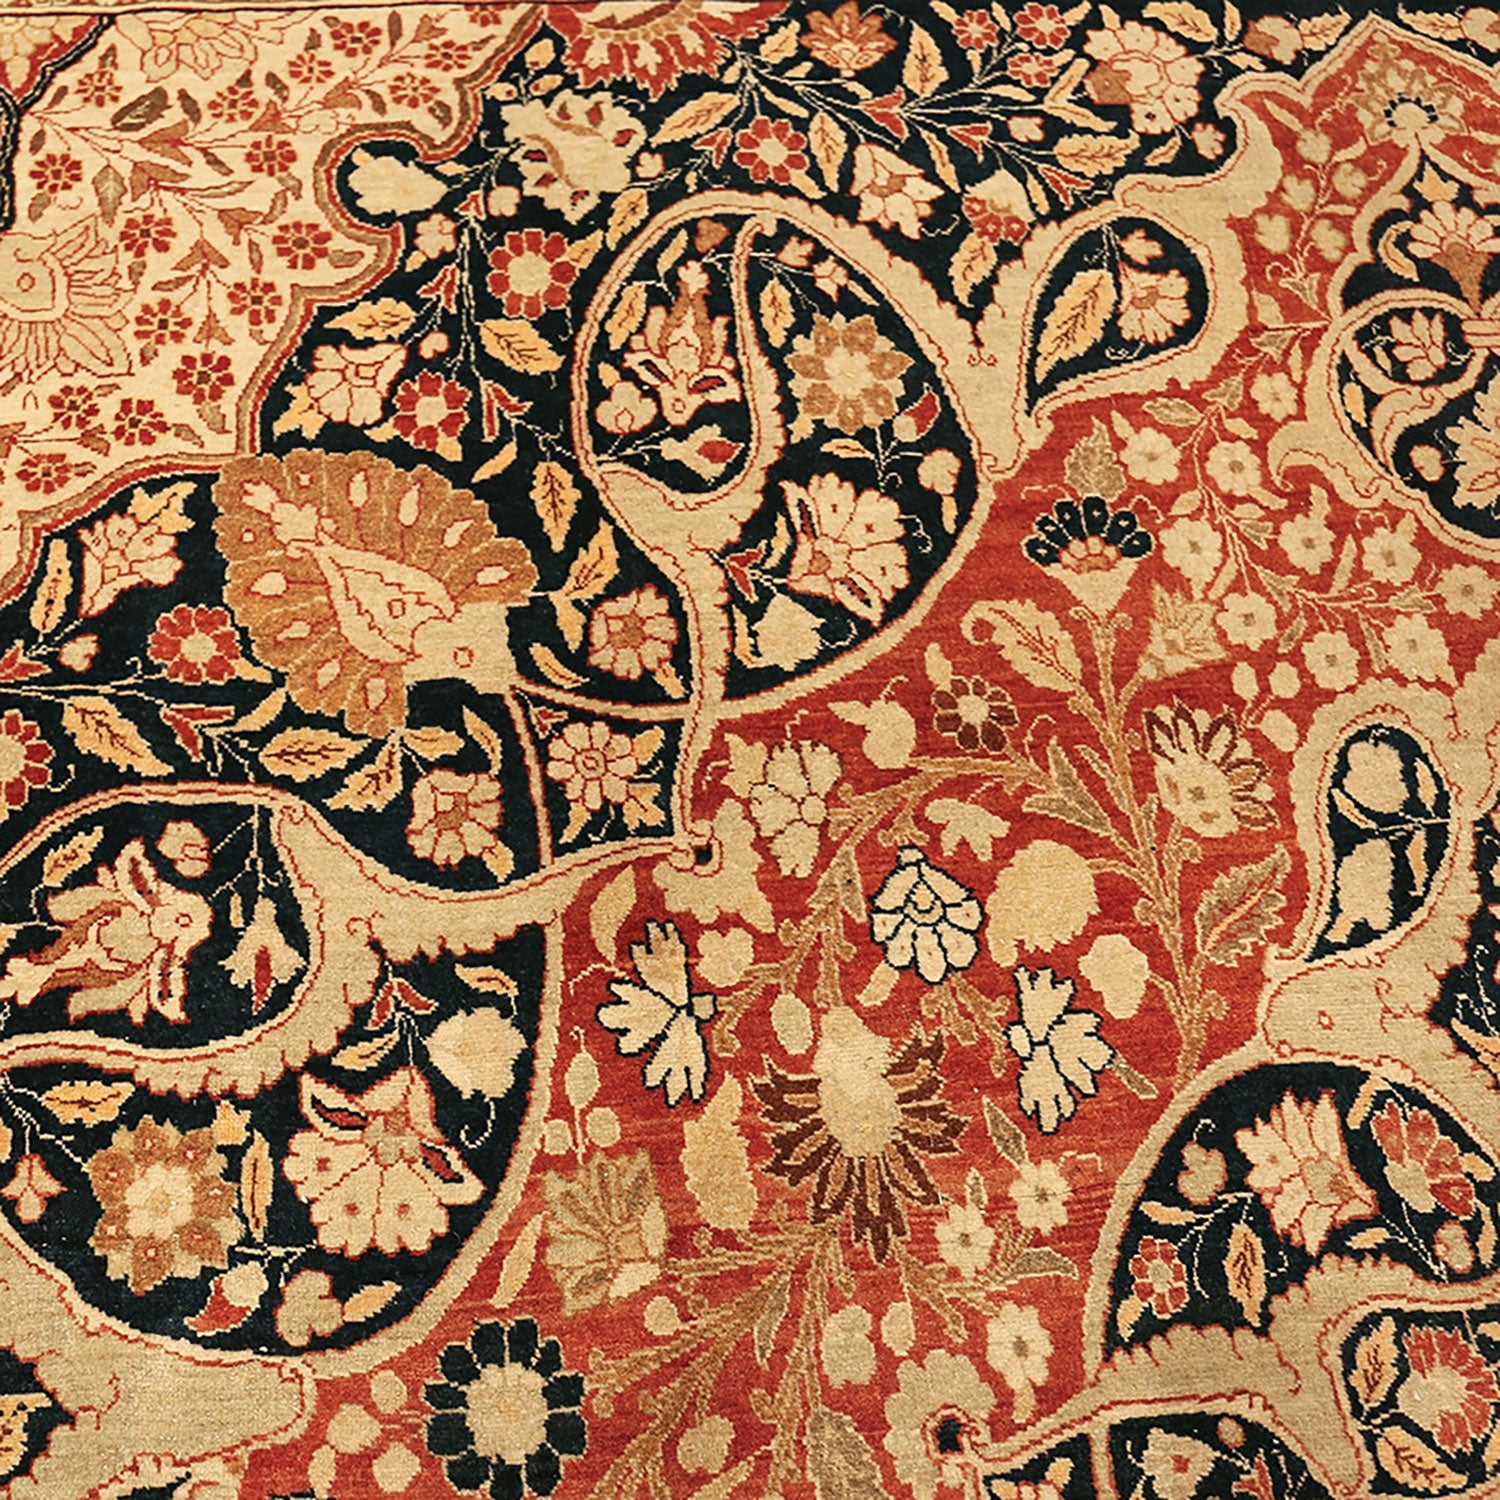 Intricately designed handwoven rug features detailed floral and botanical elements.